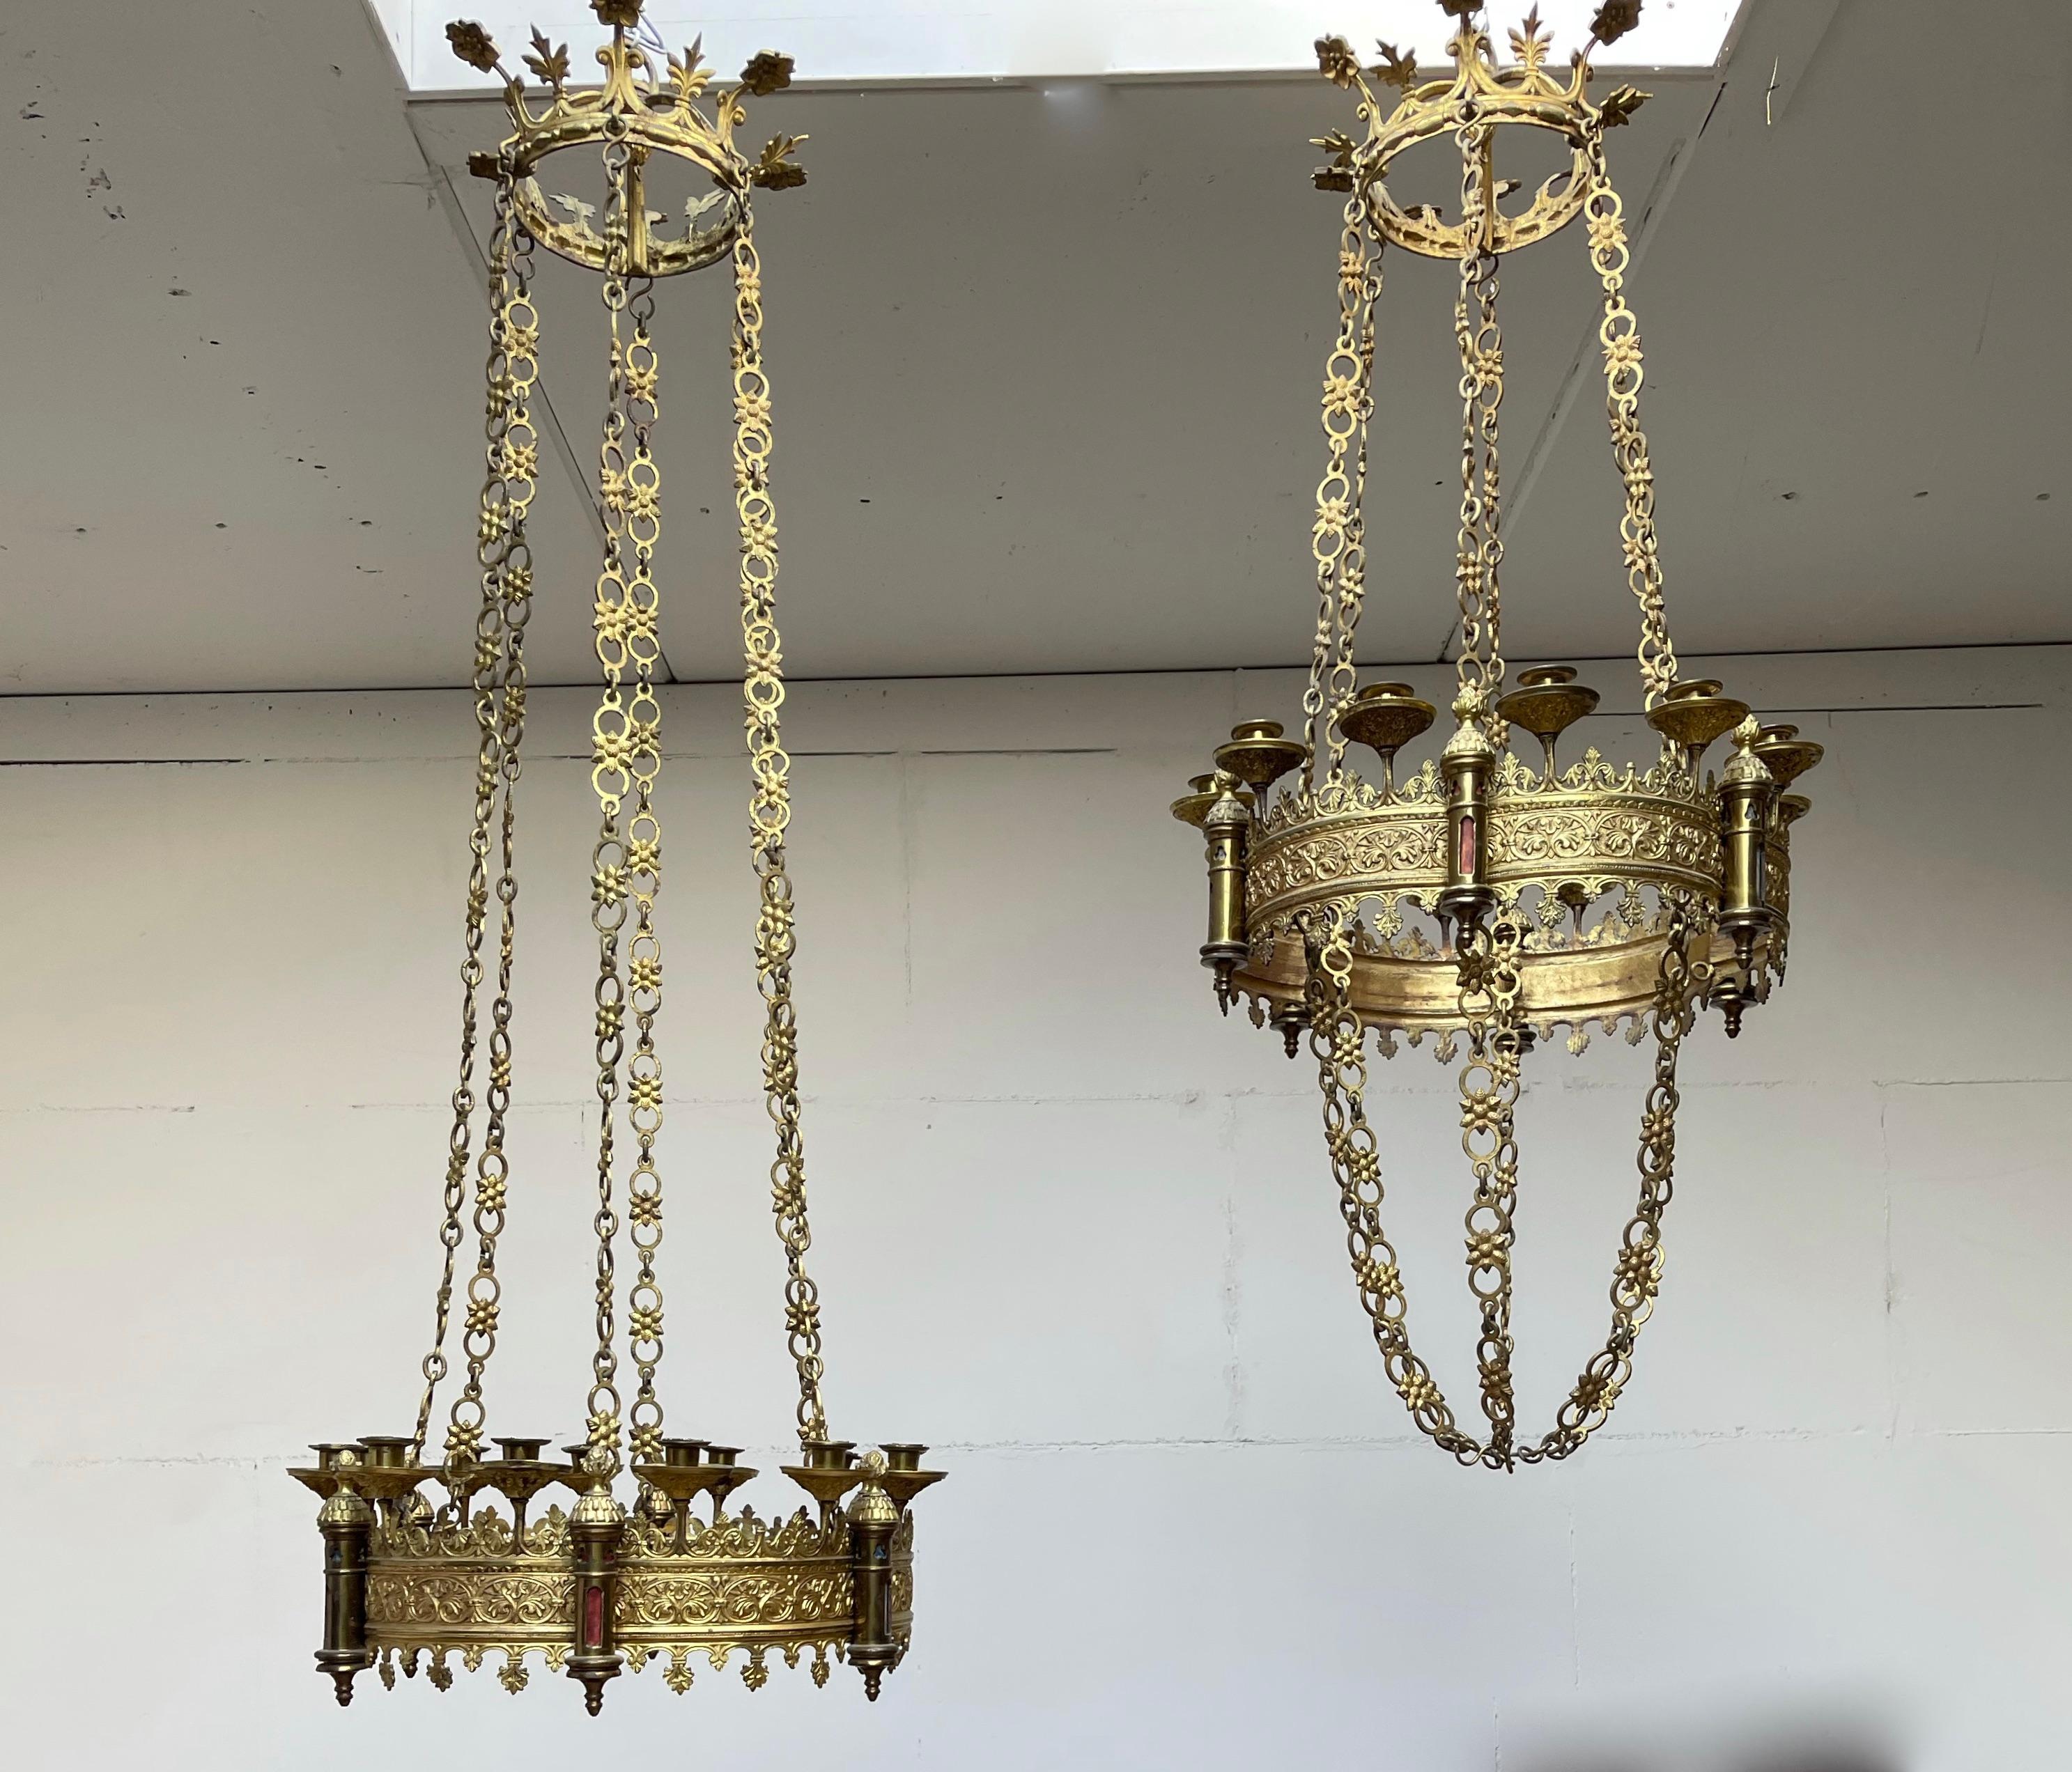 Rare & Striking Pair Gilt Bronze Gothic Revival Advent Wreath Candle Chandeliers 12